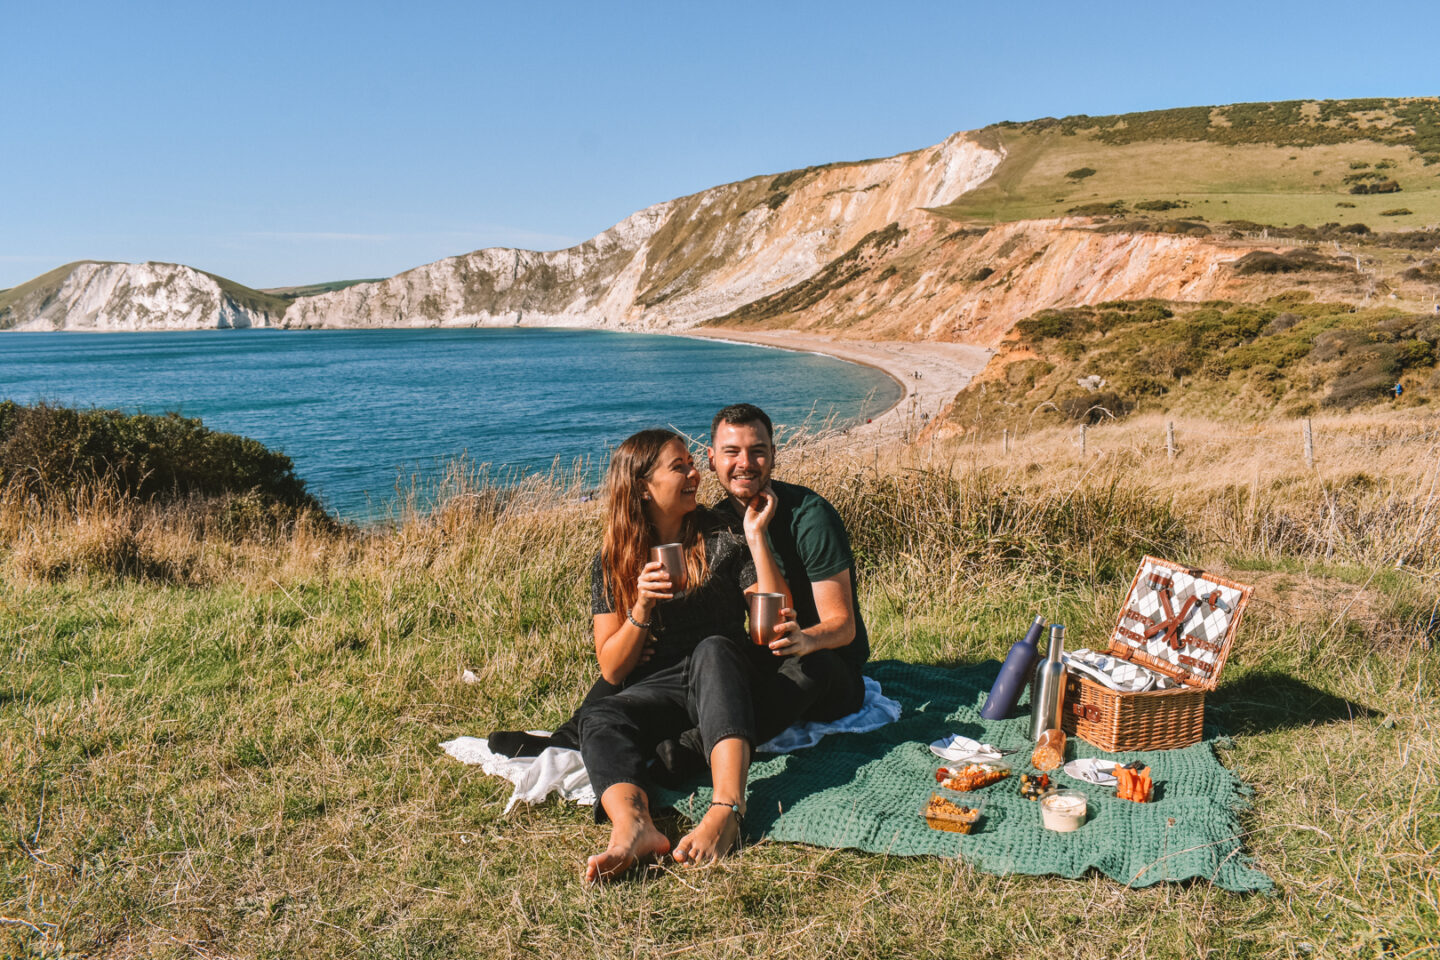 Places to visit in Dorset - Tyneham
Village and Worbarrow Bay